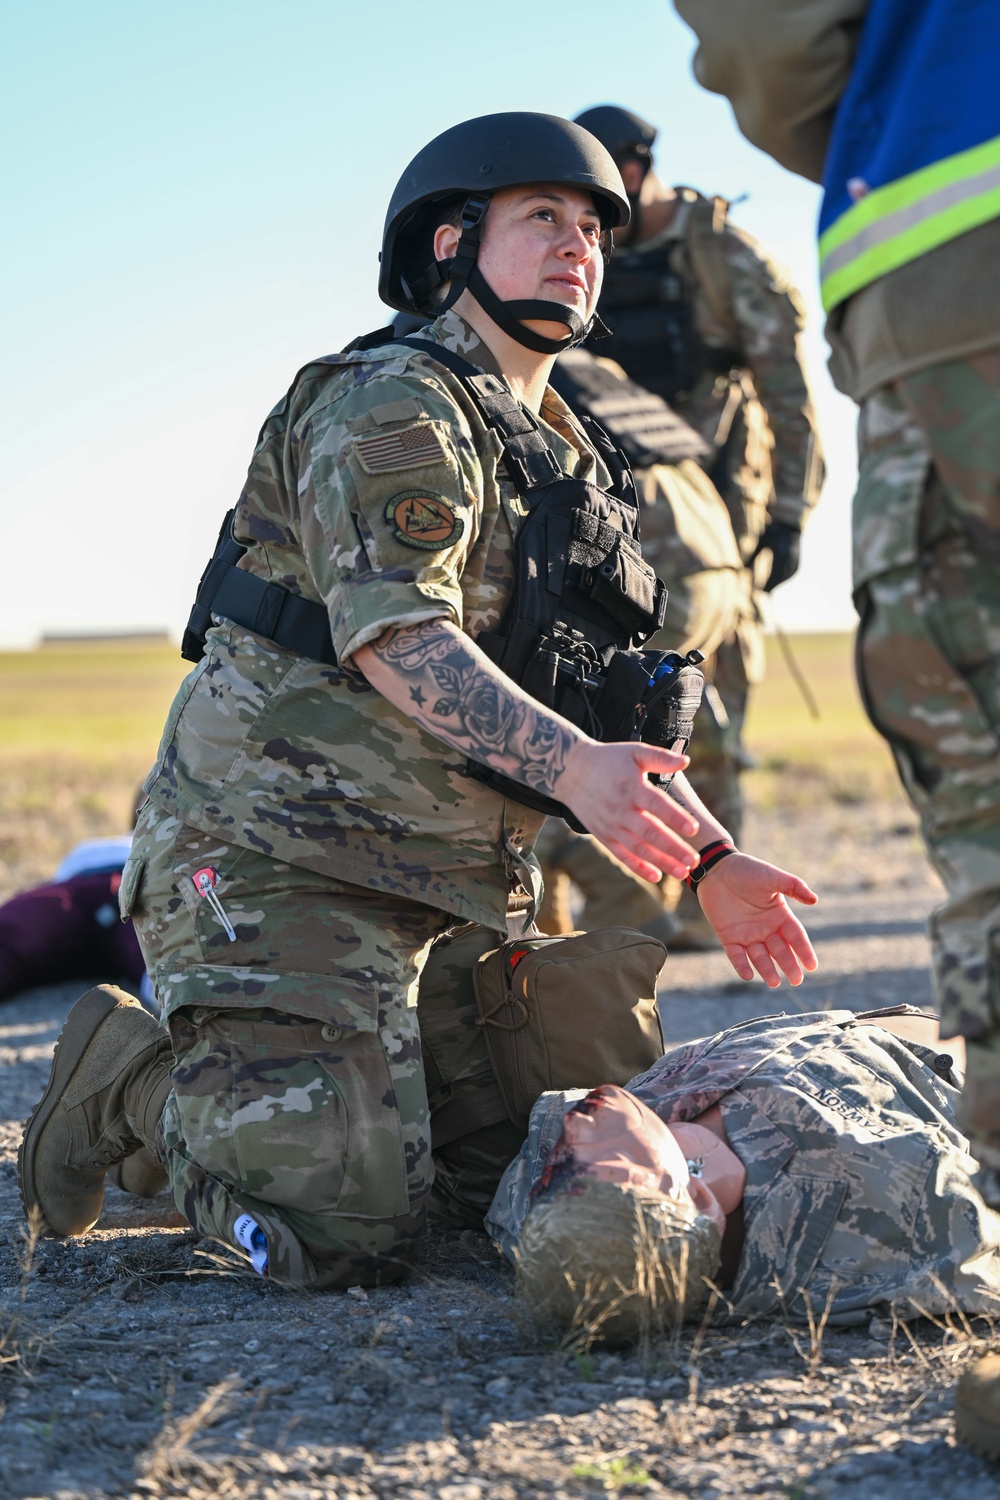 Joint exercise at Altus AFB tests mission-readiness of Airmen and Soldiers